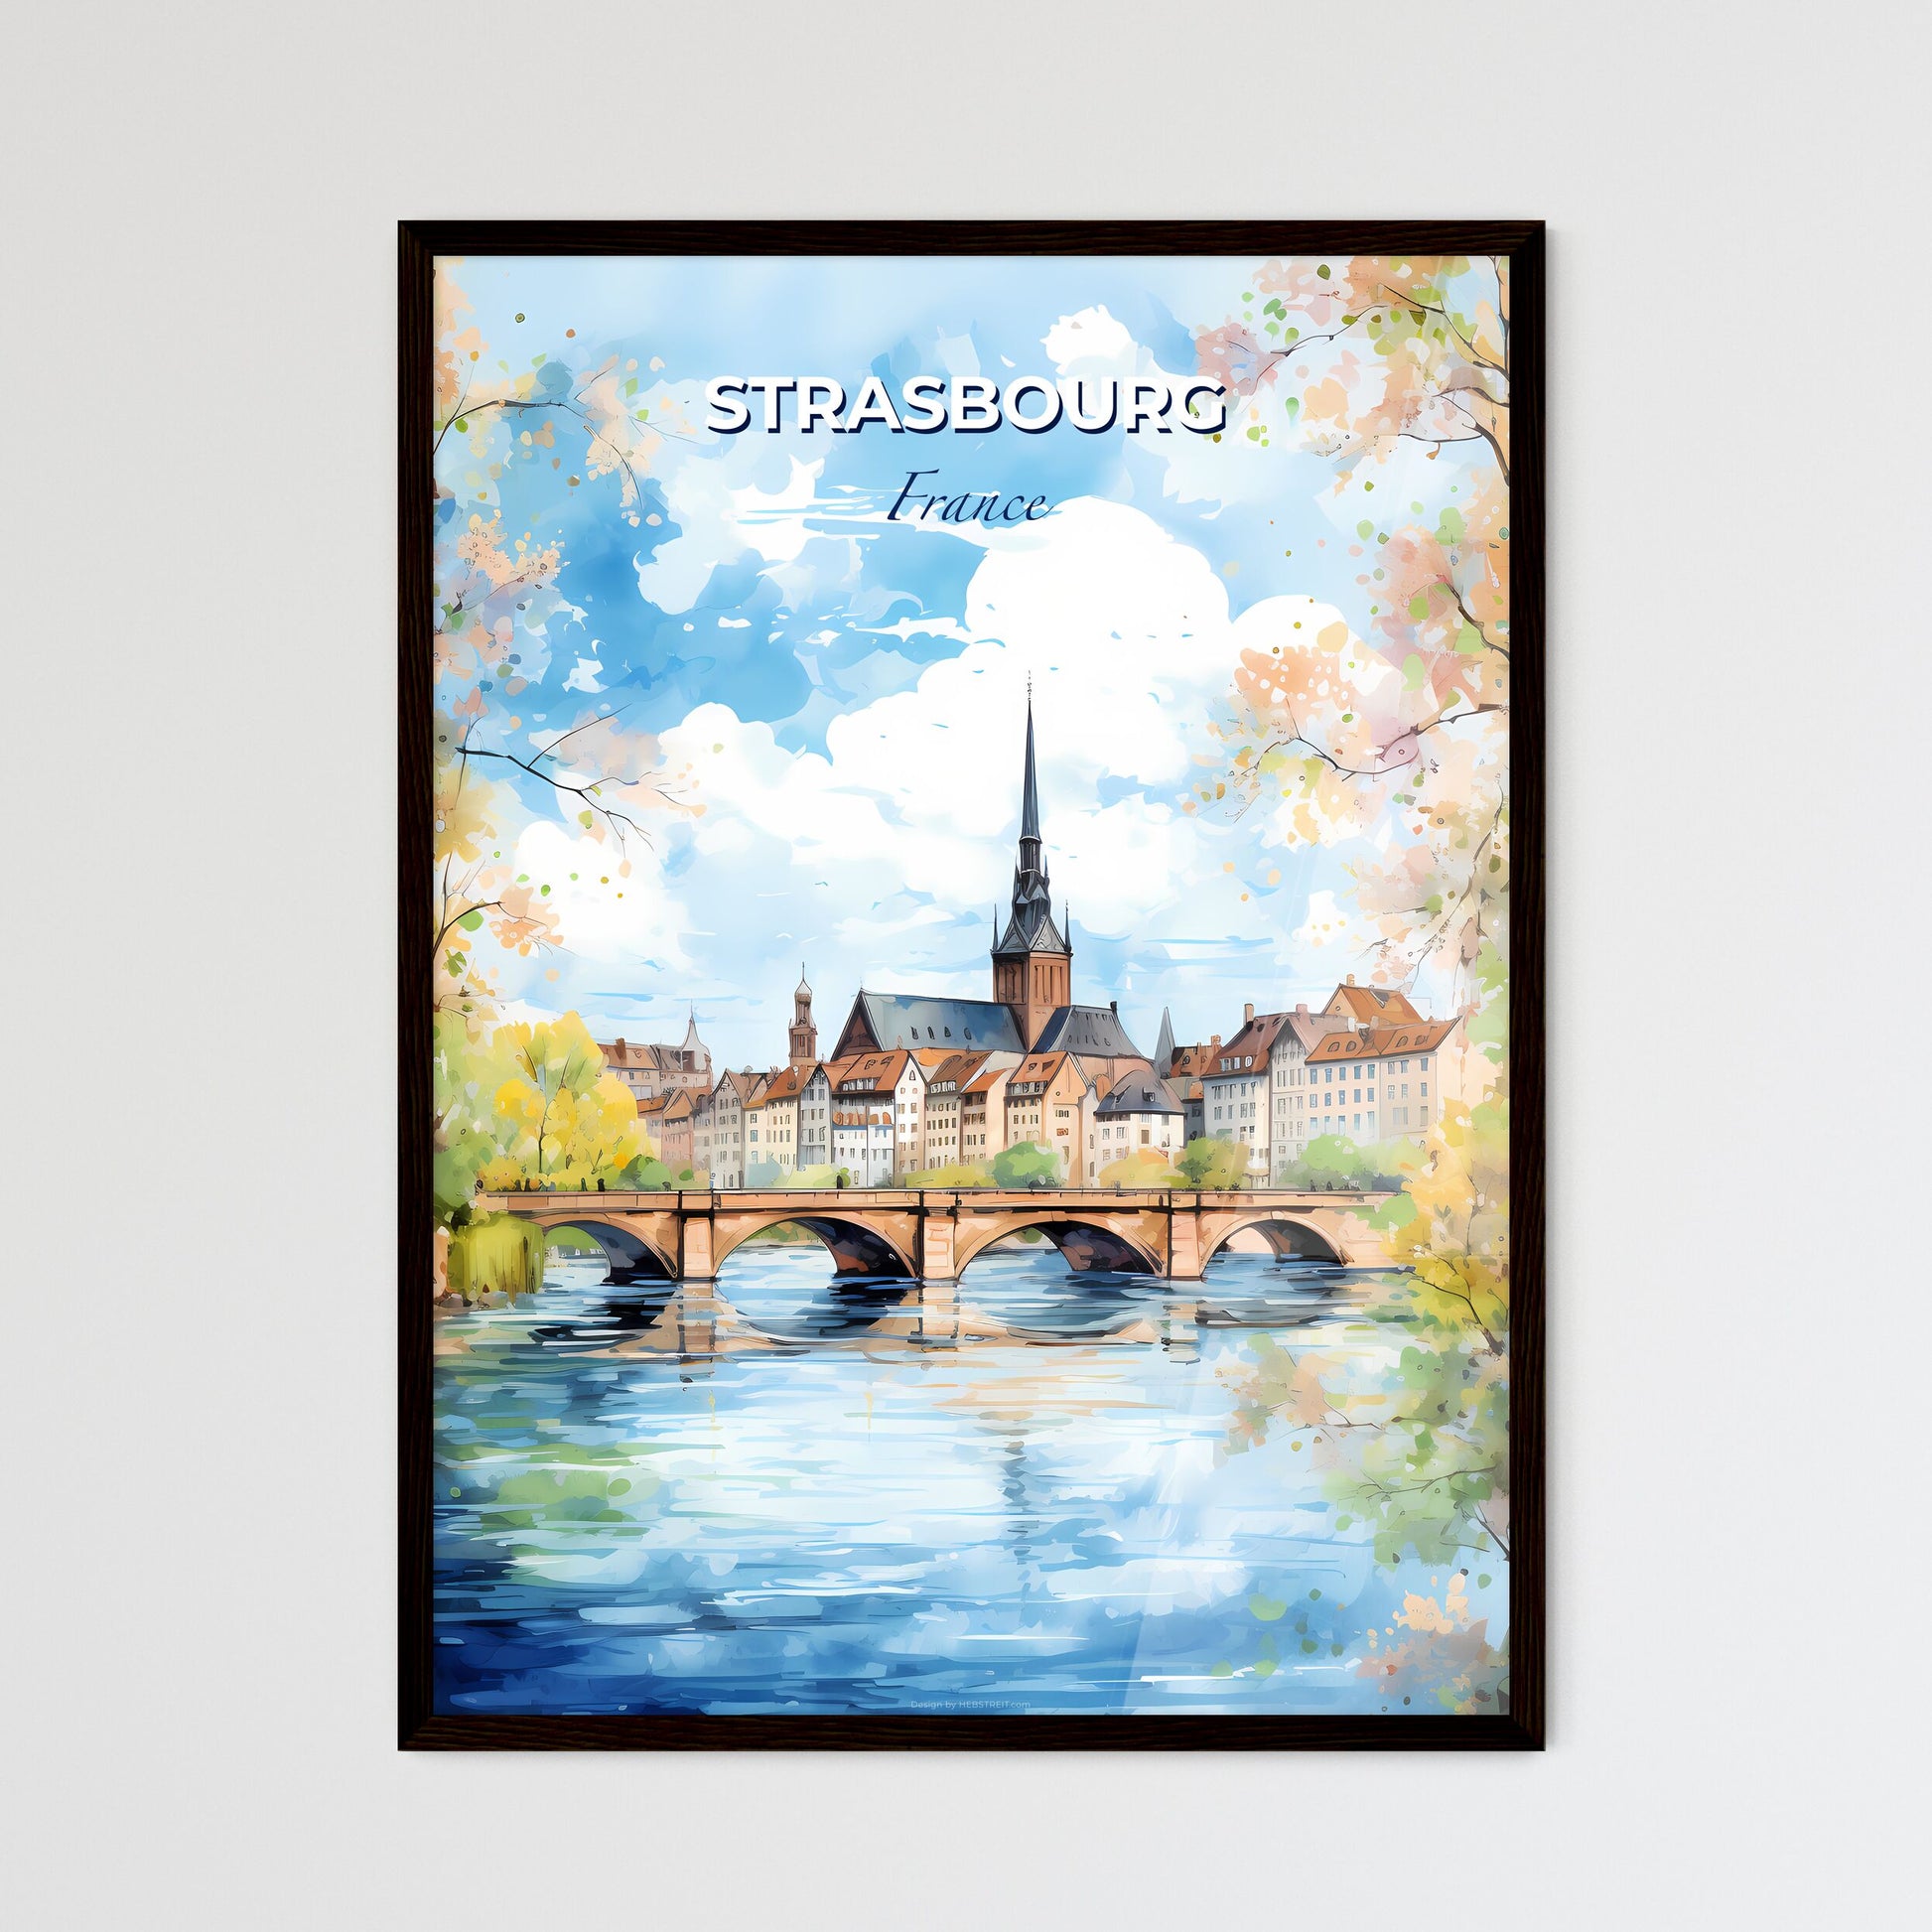 Strasbourg France Skyline - A Watercolor Of A Bridge Over A River With Buildings And Trees - Customizable Travel Gift Default Title